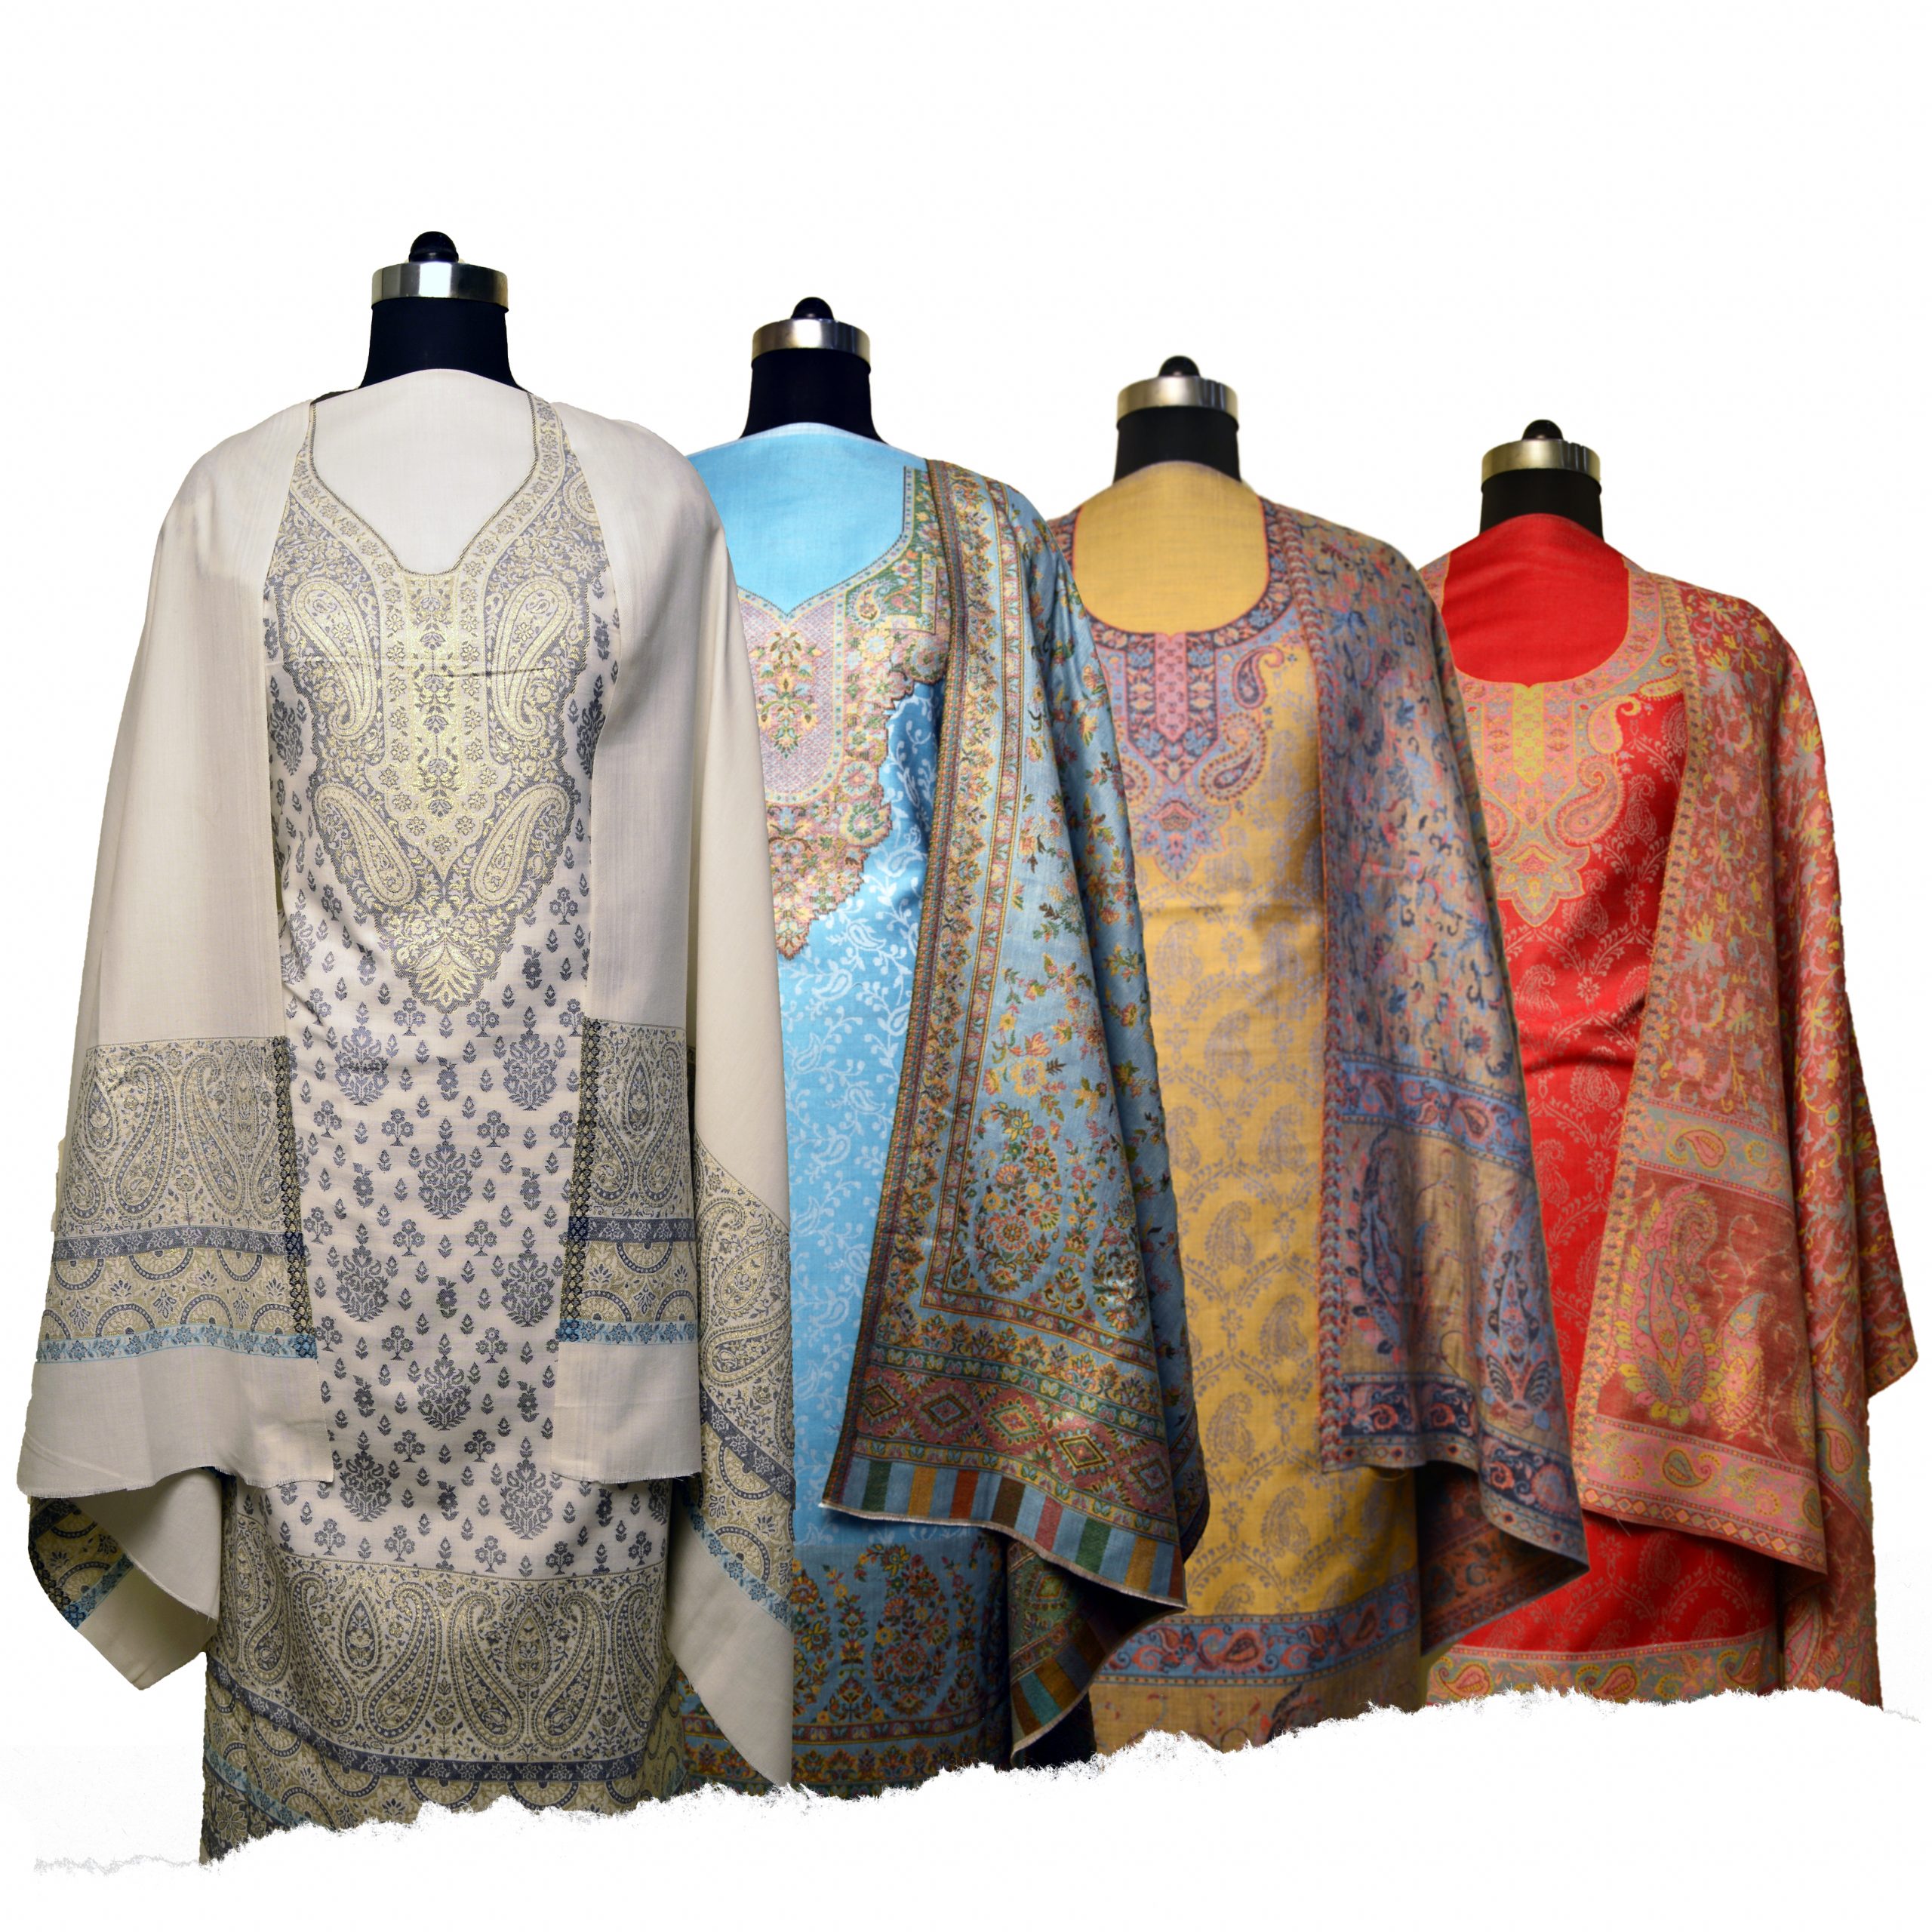 Latest kashmiri suits at wholesale prices from Amritsar, Punjab